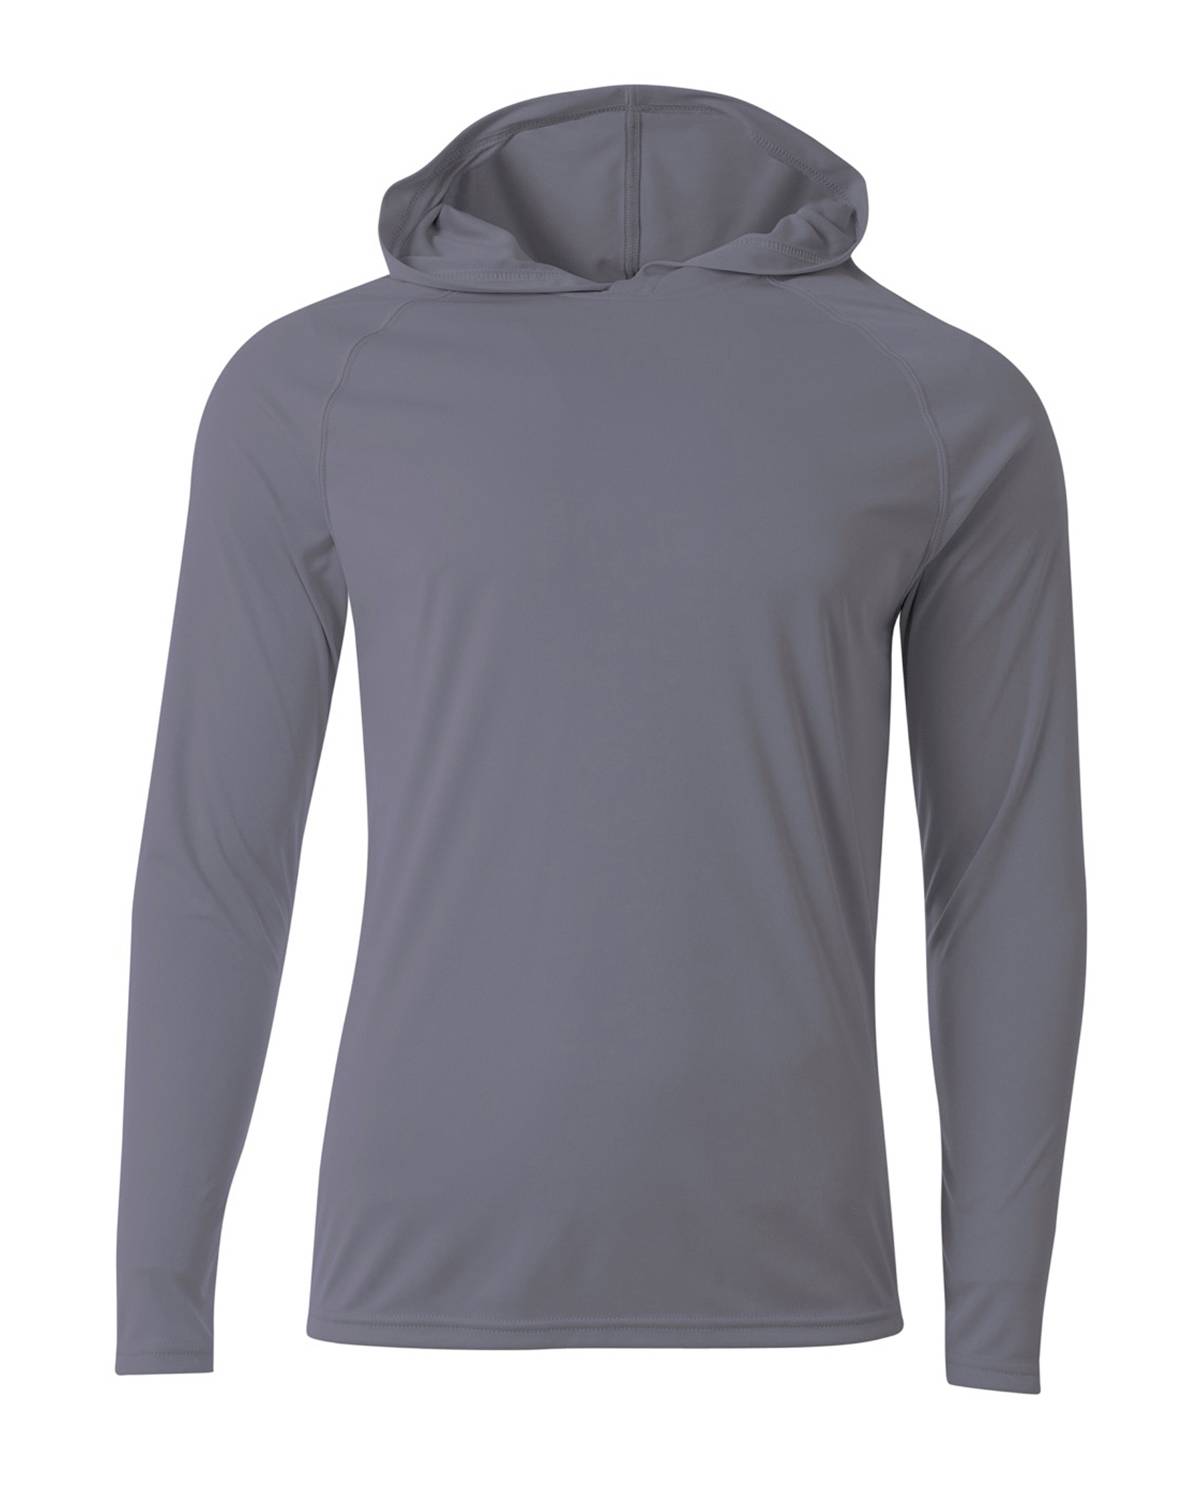 A4 N3409 Mens Cooling Performance Long-Sleeve Hooded T-shirt